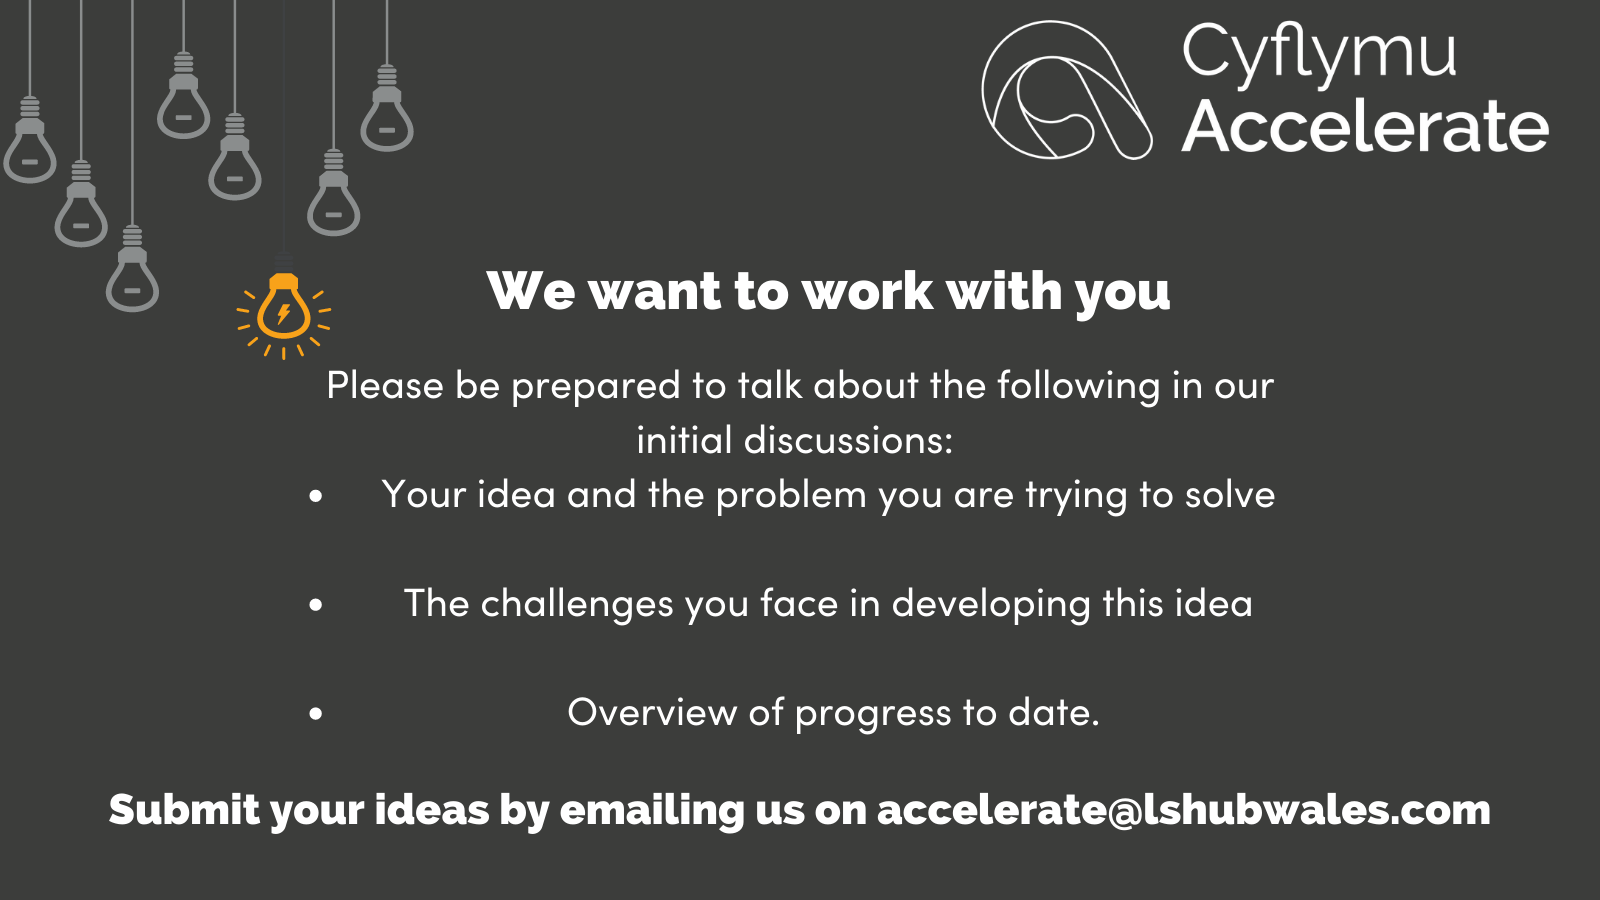 Details of how to email Accelerate, accelerate at lshubwales.com